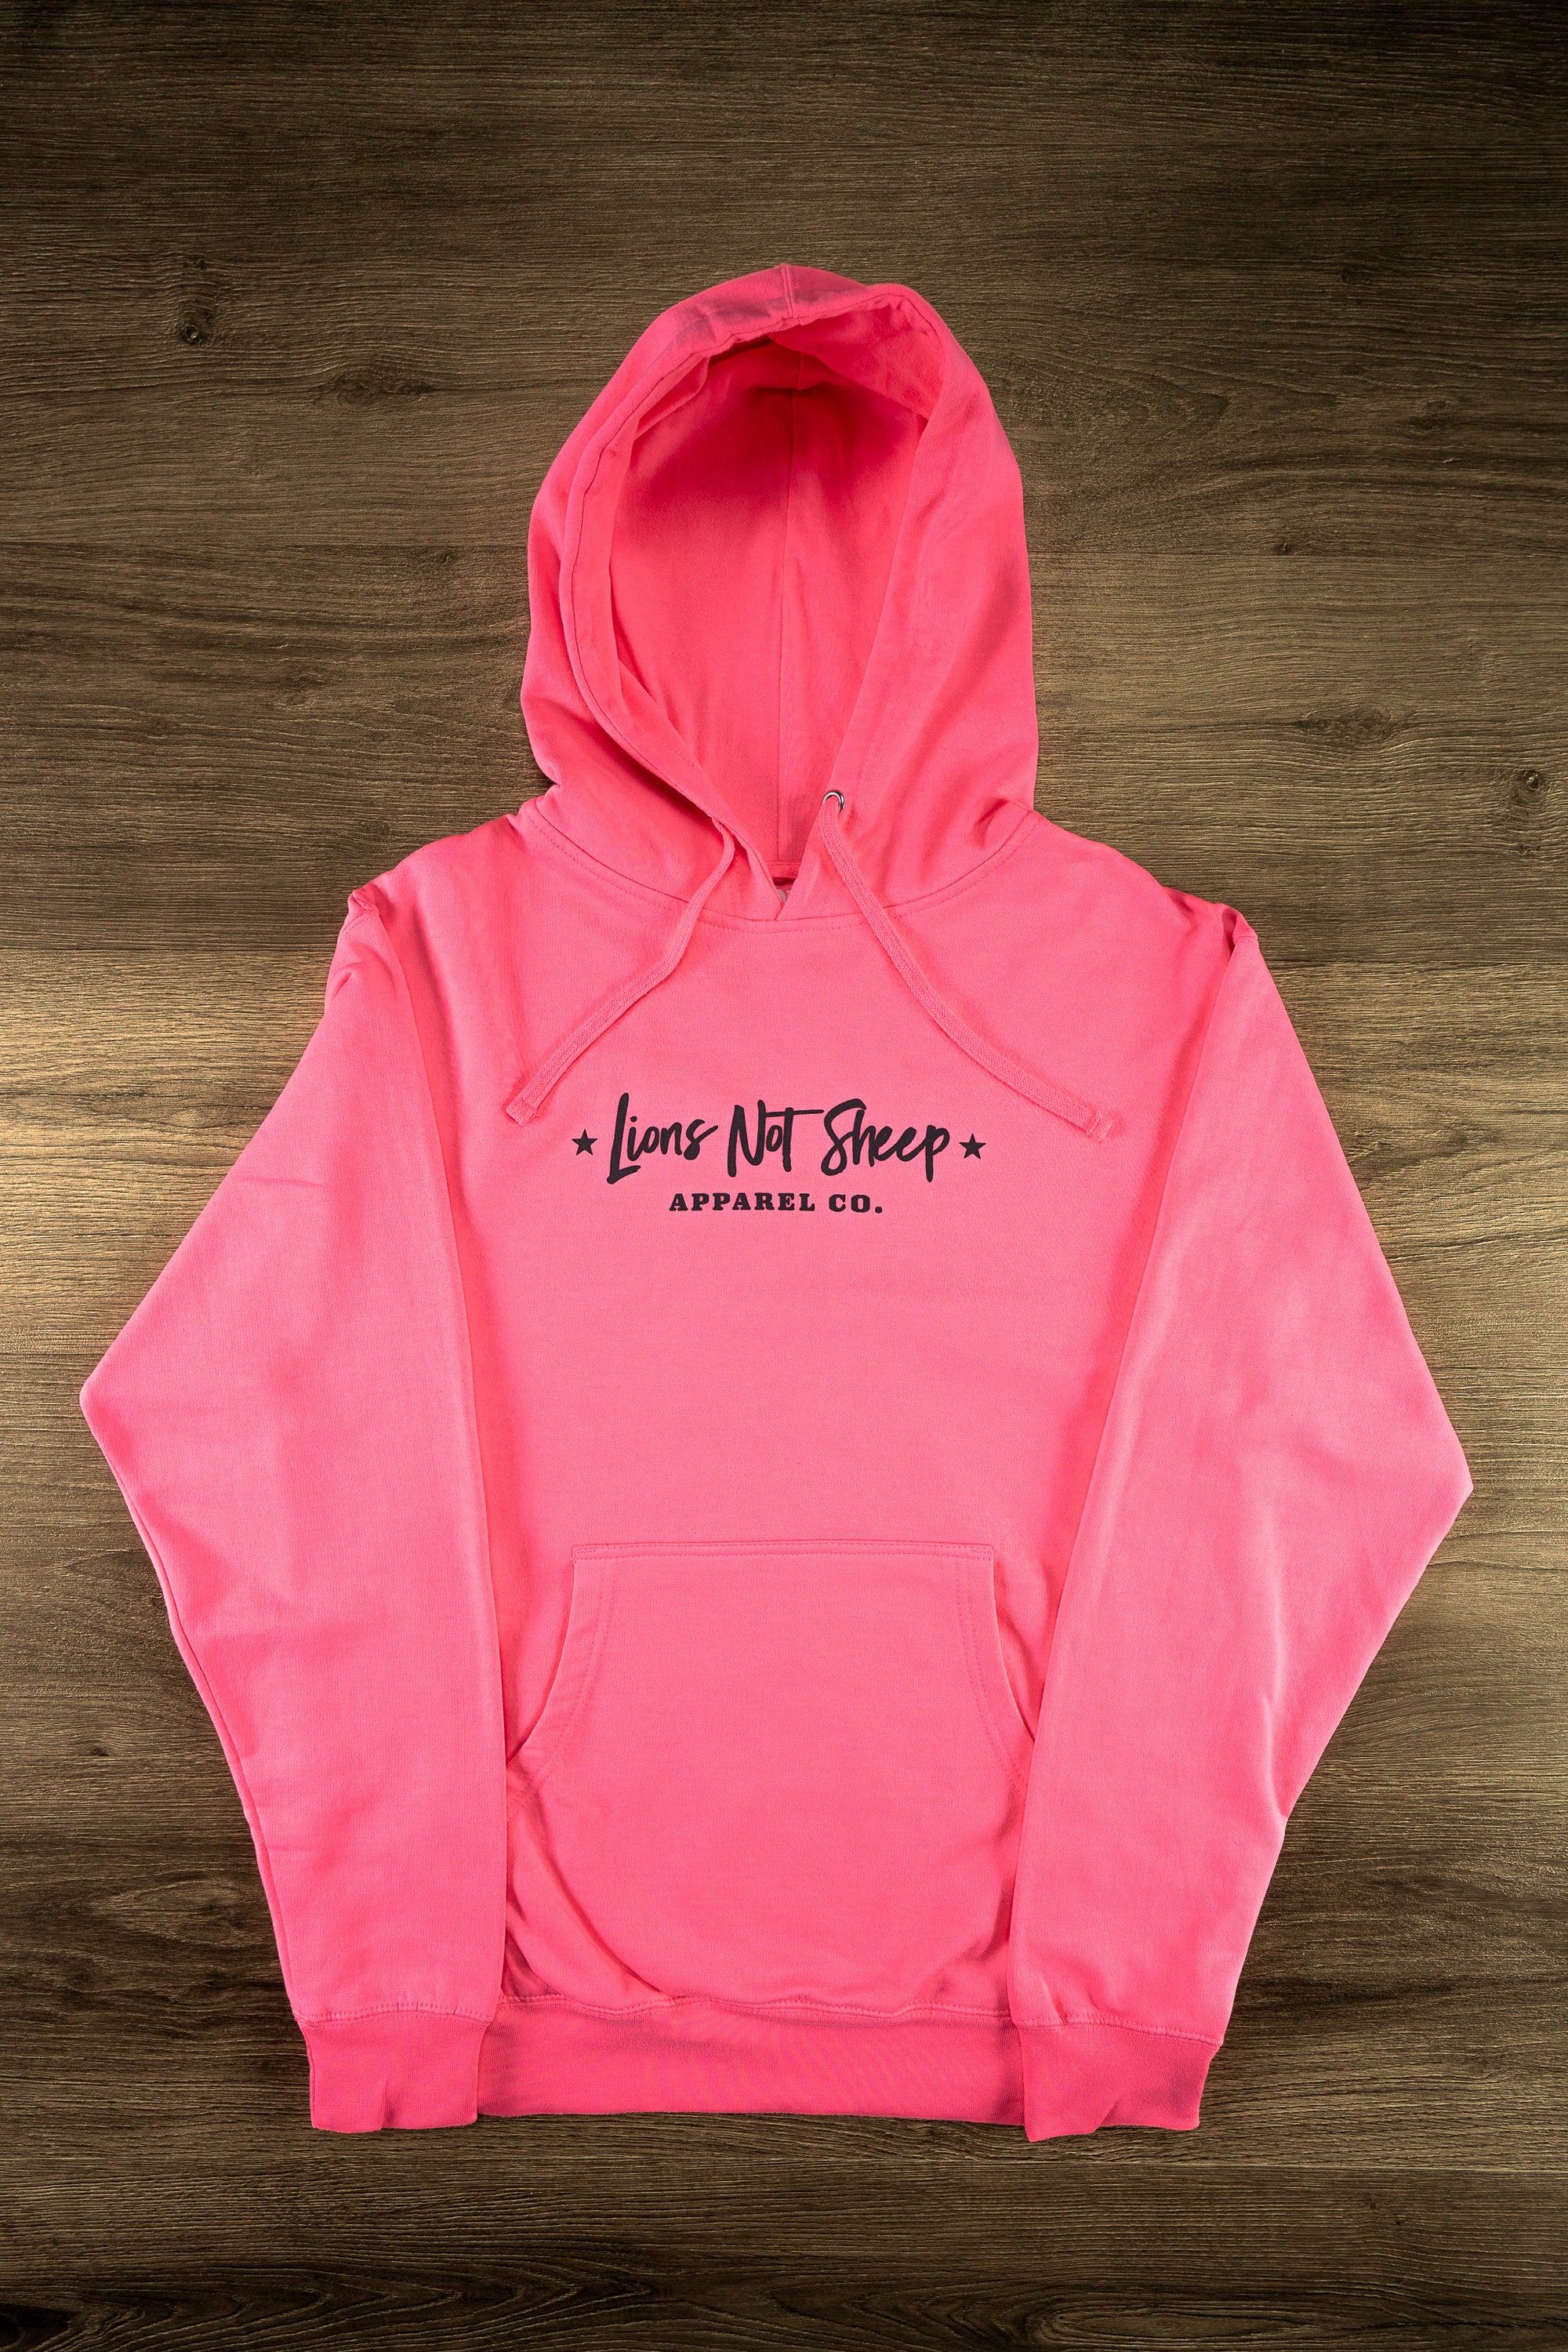 LIONS NOT SHEEP APPAREL CO. Unisex Pullover Hoodie (PINK) - Lions Not Sheep ®